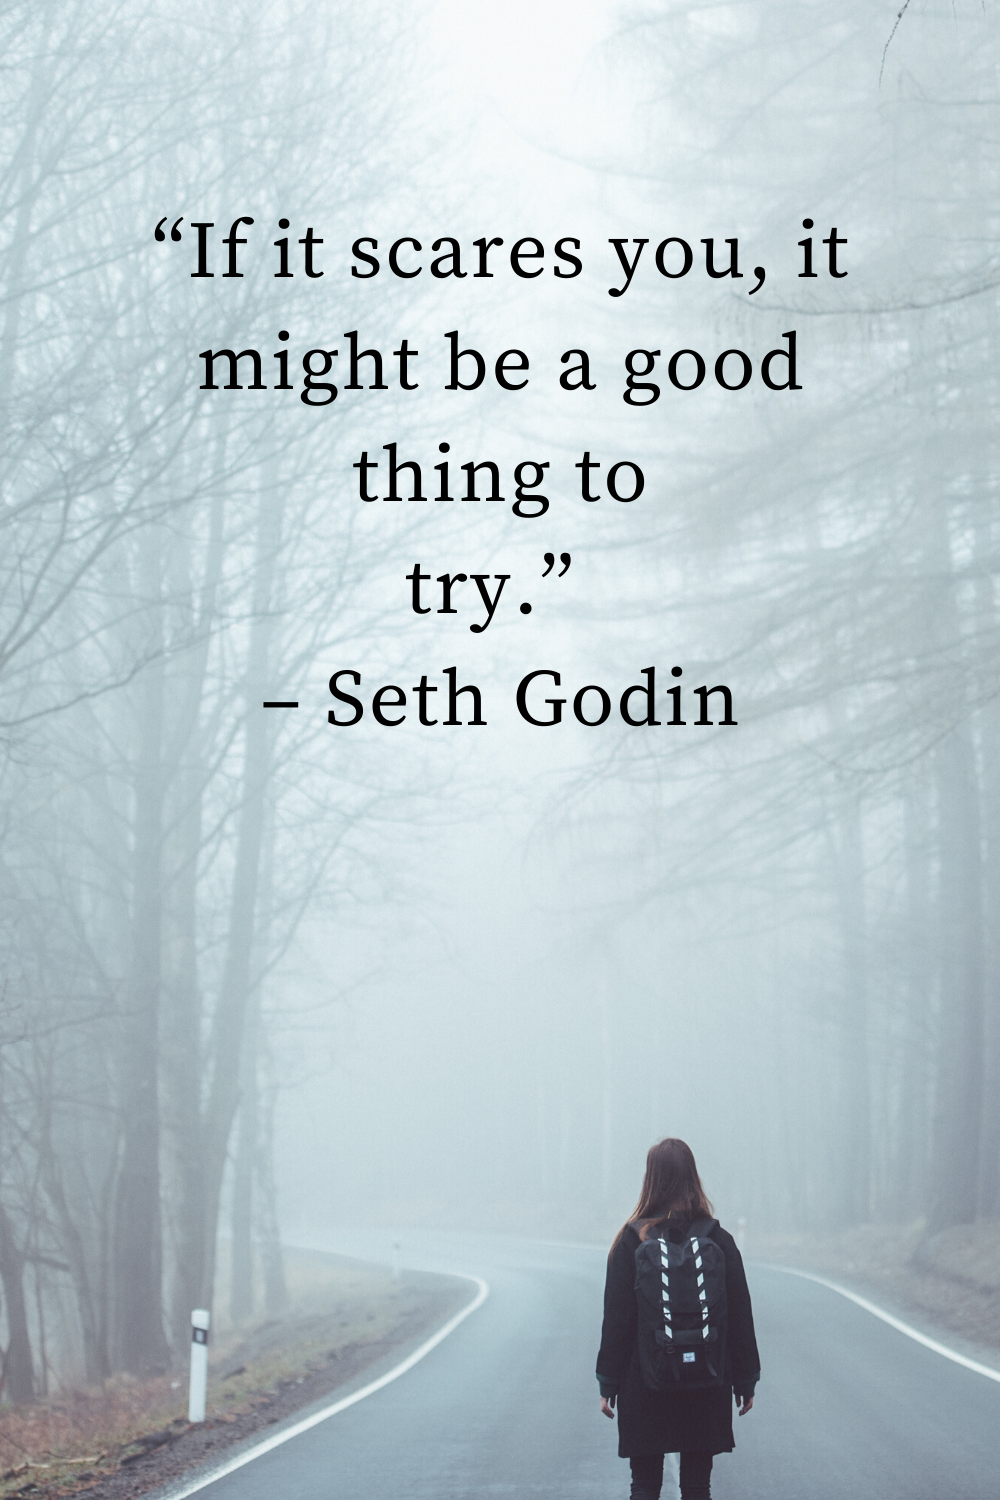 Motivational Quote -- If it scares you, it might be a good thing to try.